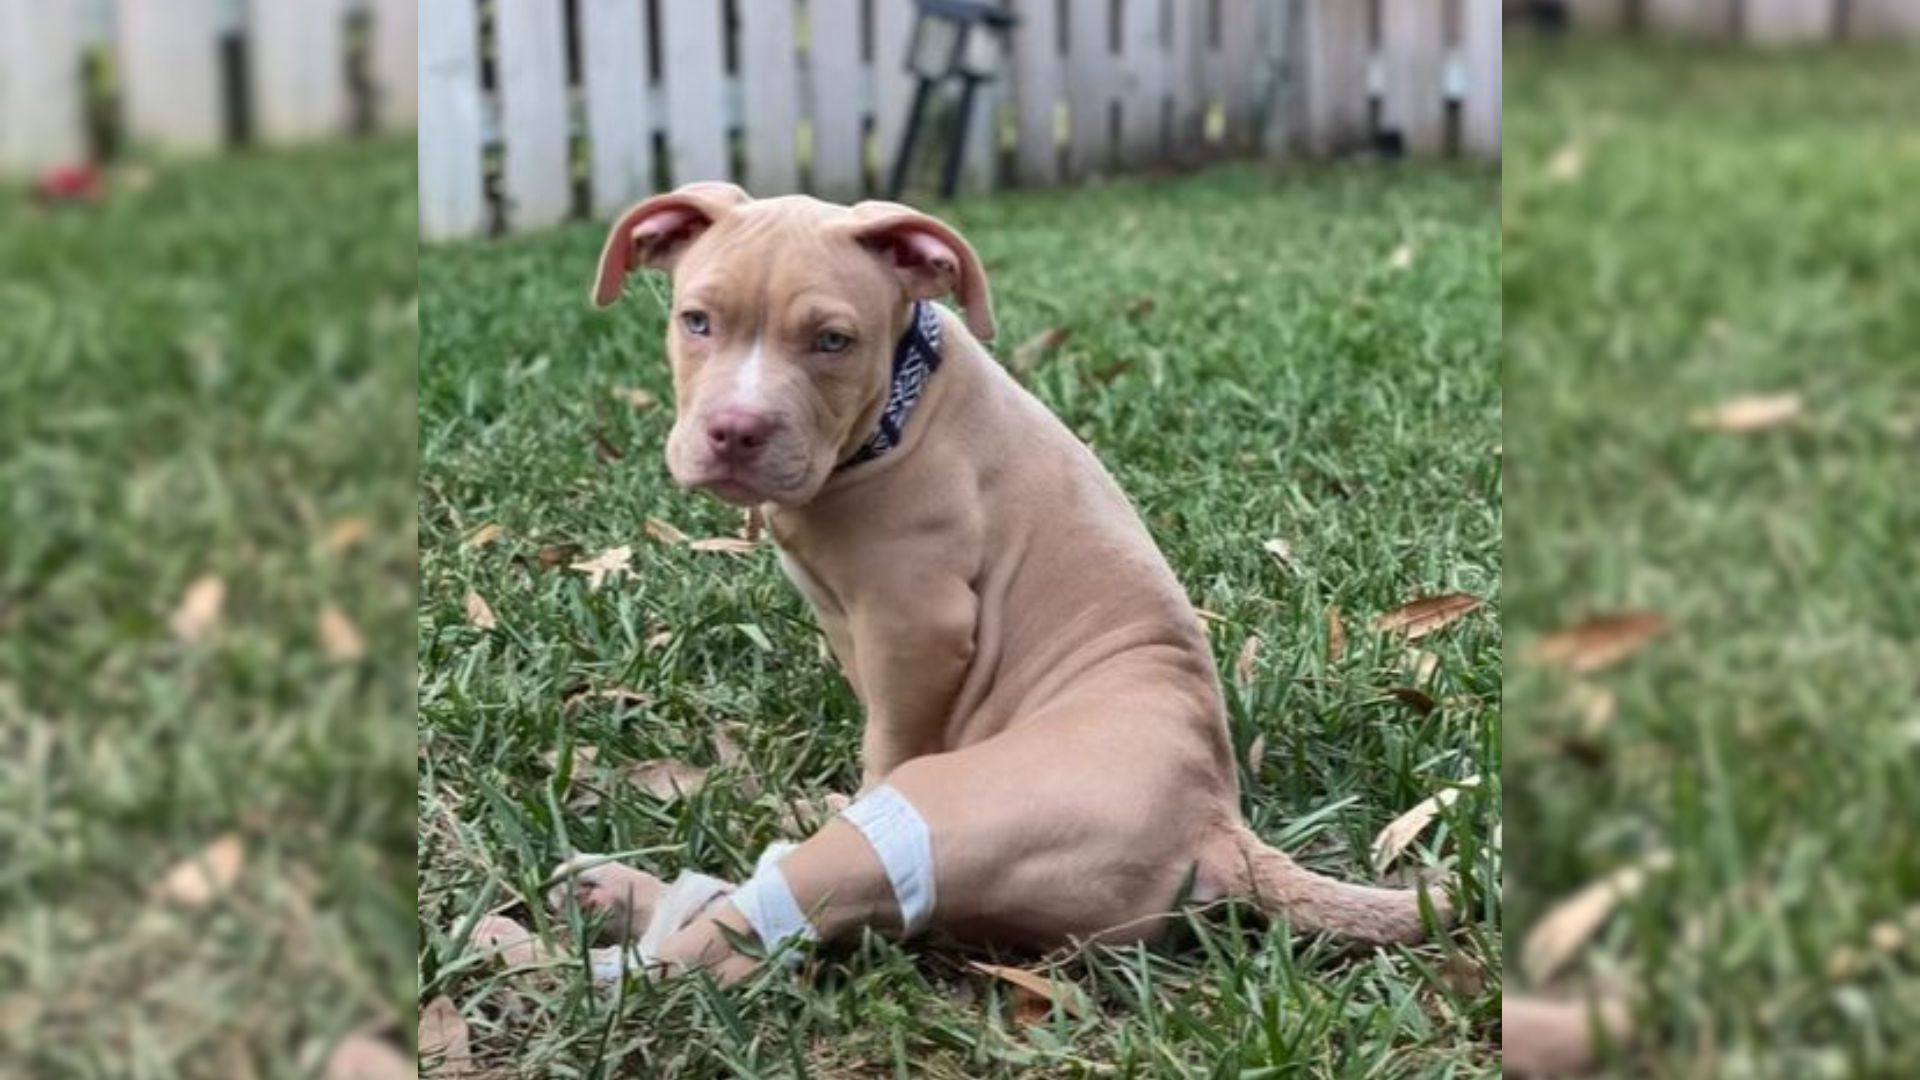 Adorable 5-Week-Old Puppy Unable To Walk Abandoned In A Public Restroom